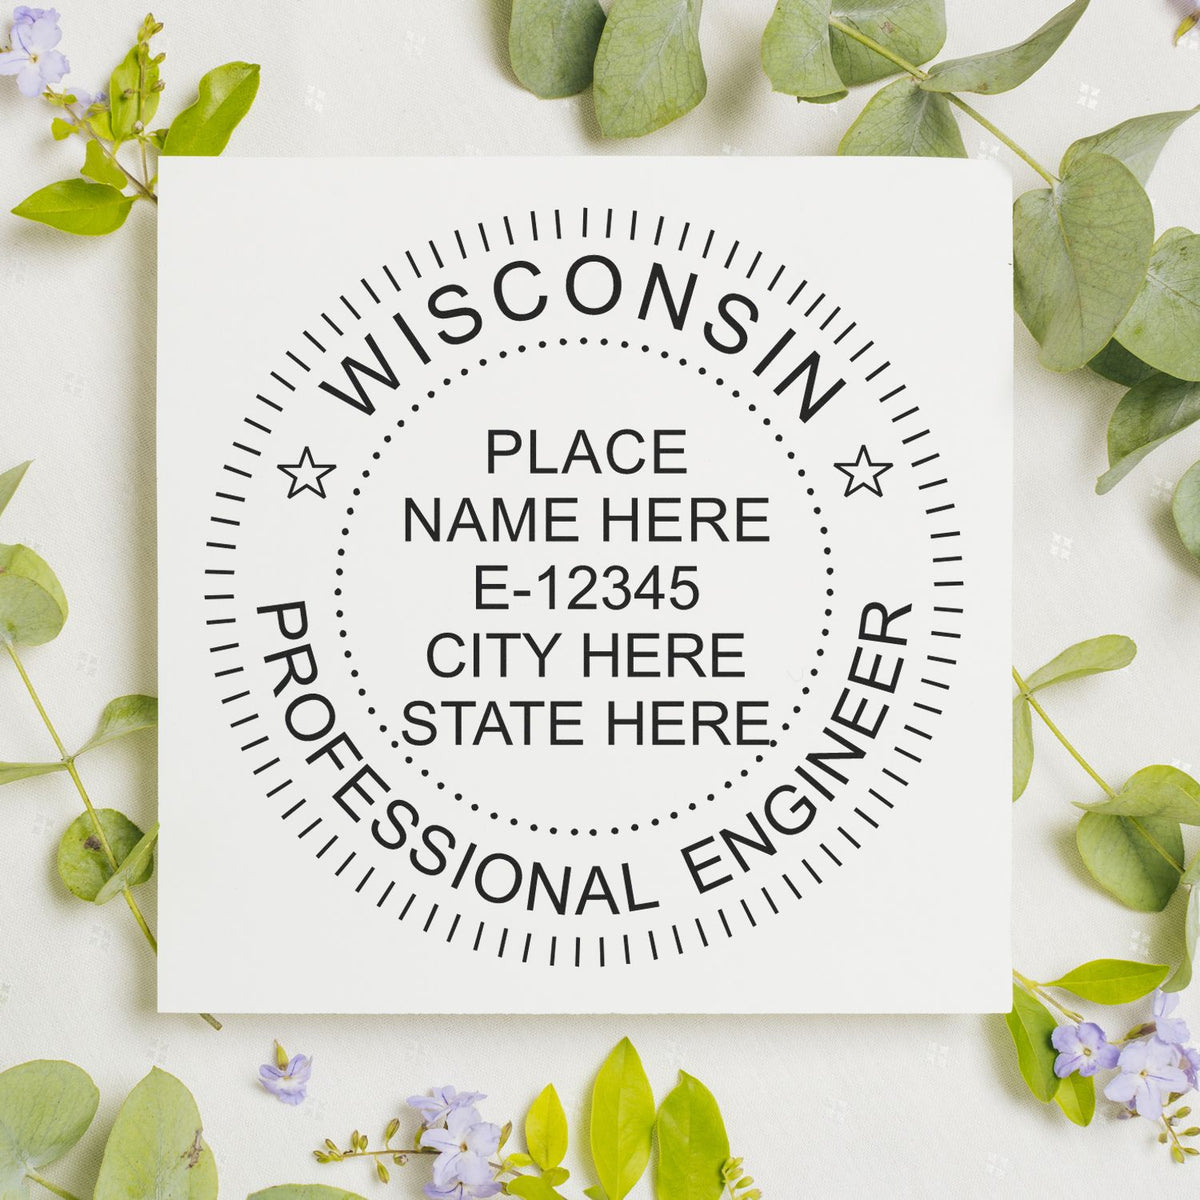 A stamped impression of the Slim Pre-Inked Wisconsin Professional Engineer Seal Stamp in this stylish lifestyle photo, setting the tone for a unique and personalized product.